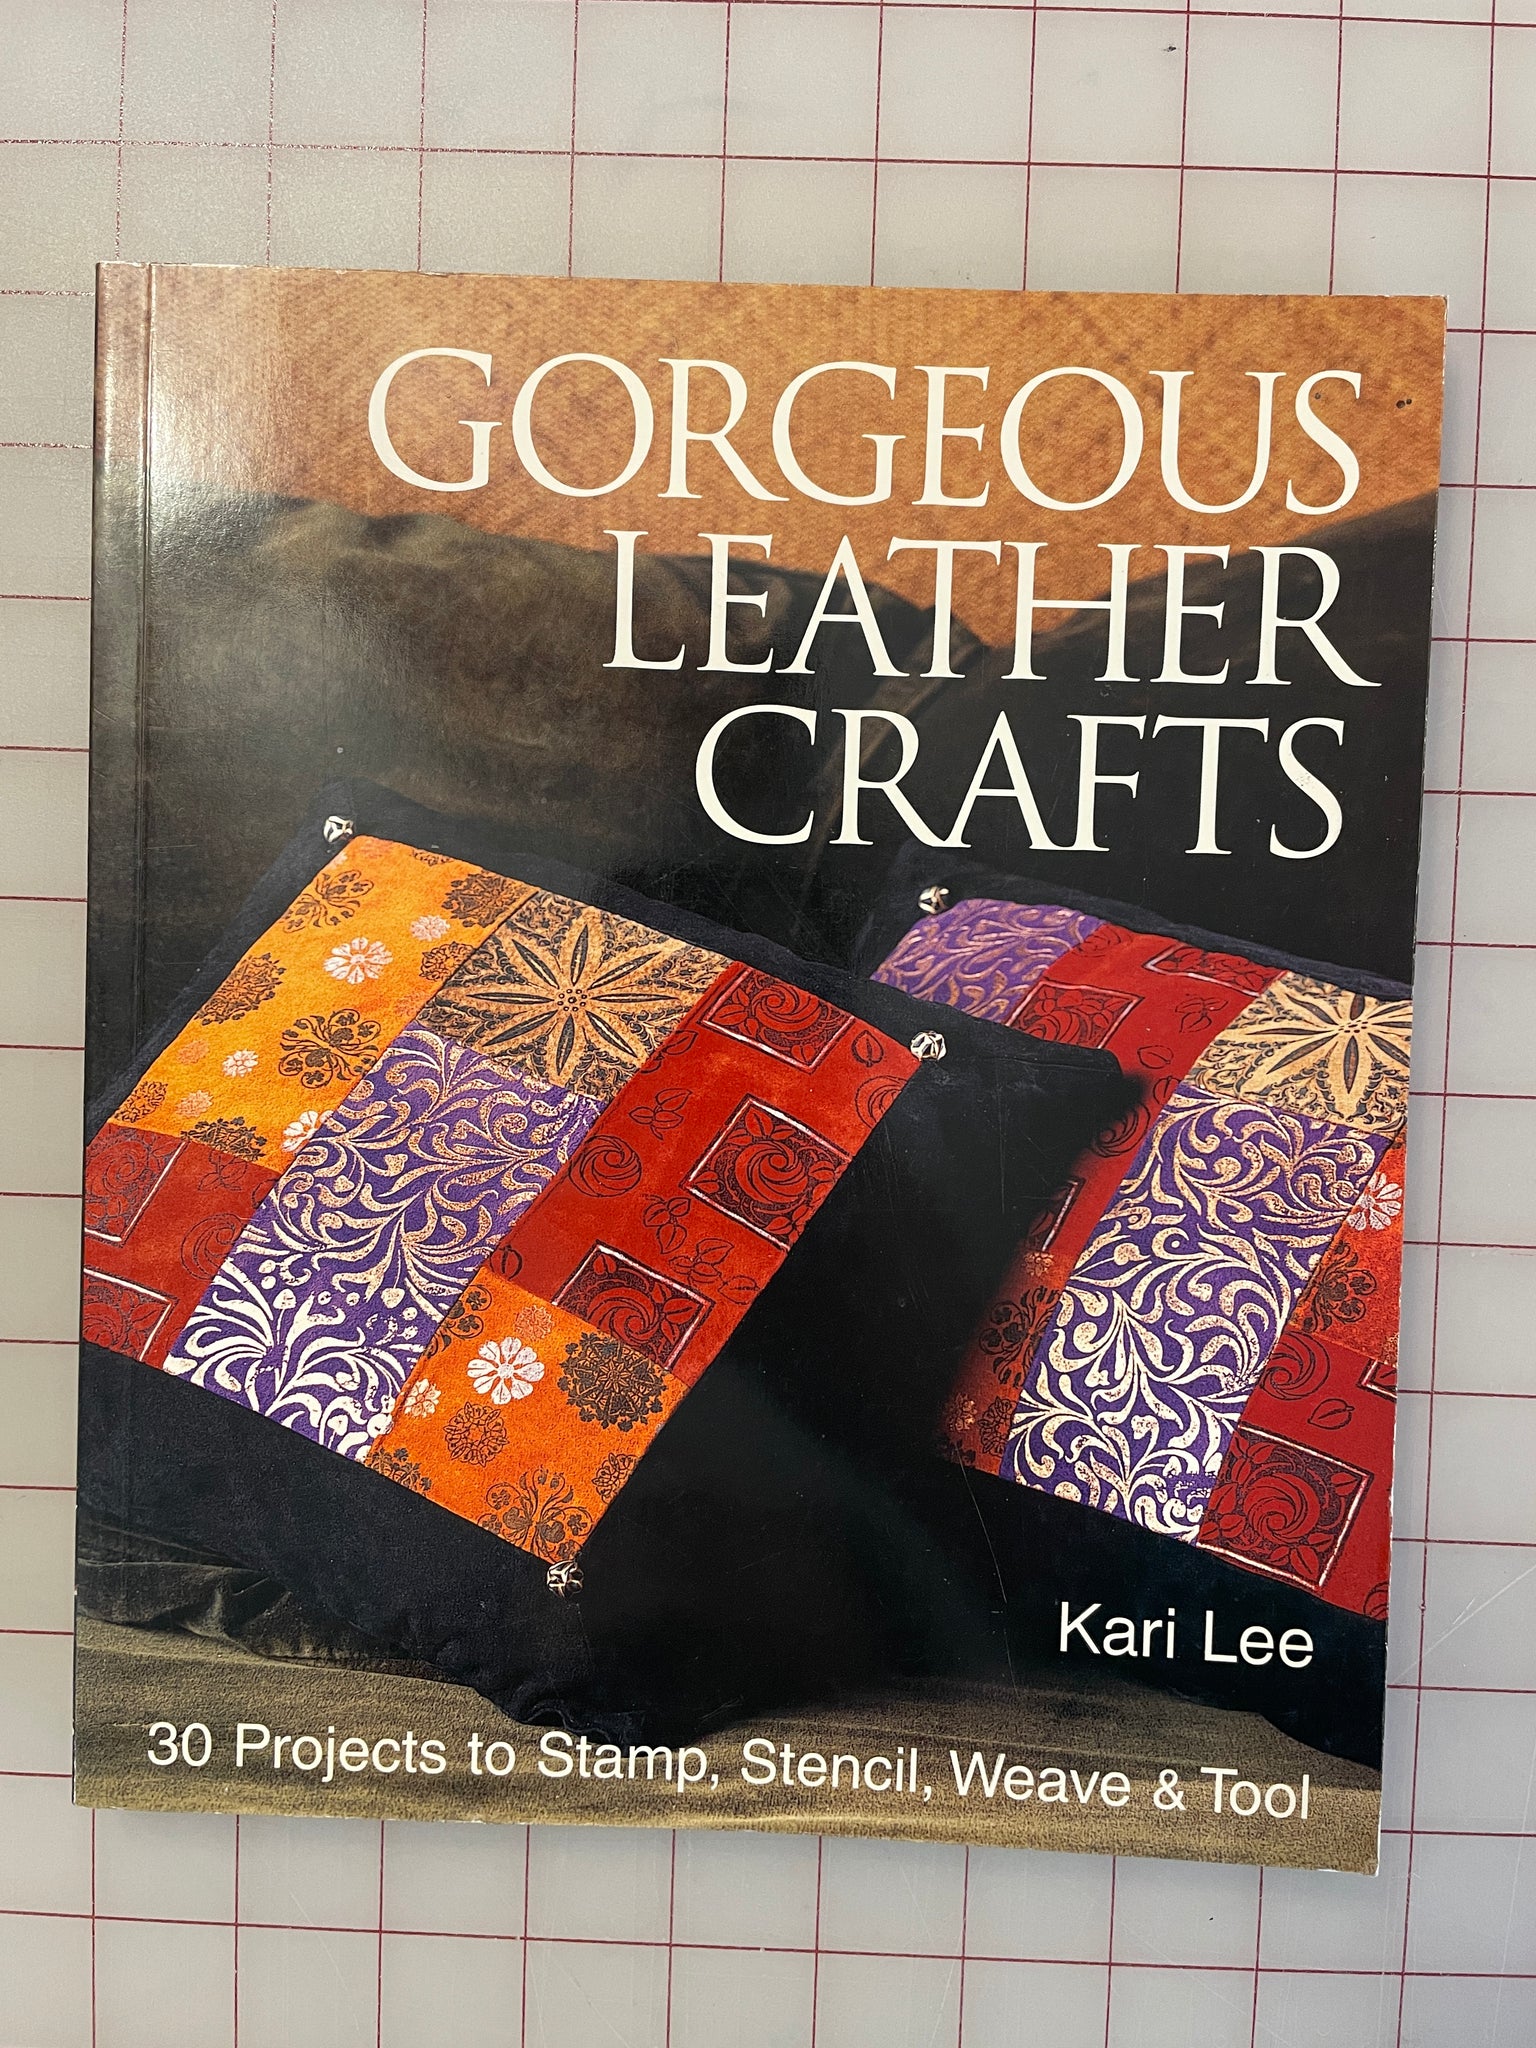 SALE 2002 Book - "Gorgeous Leather Crafts"